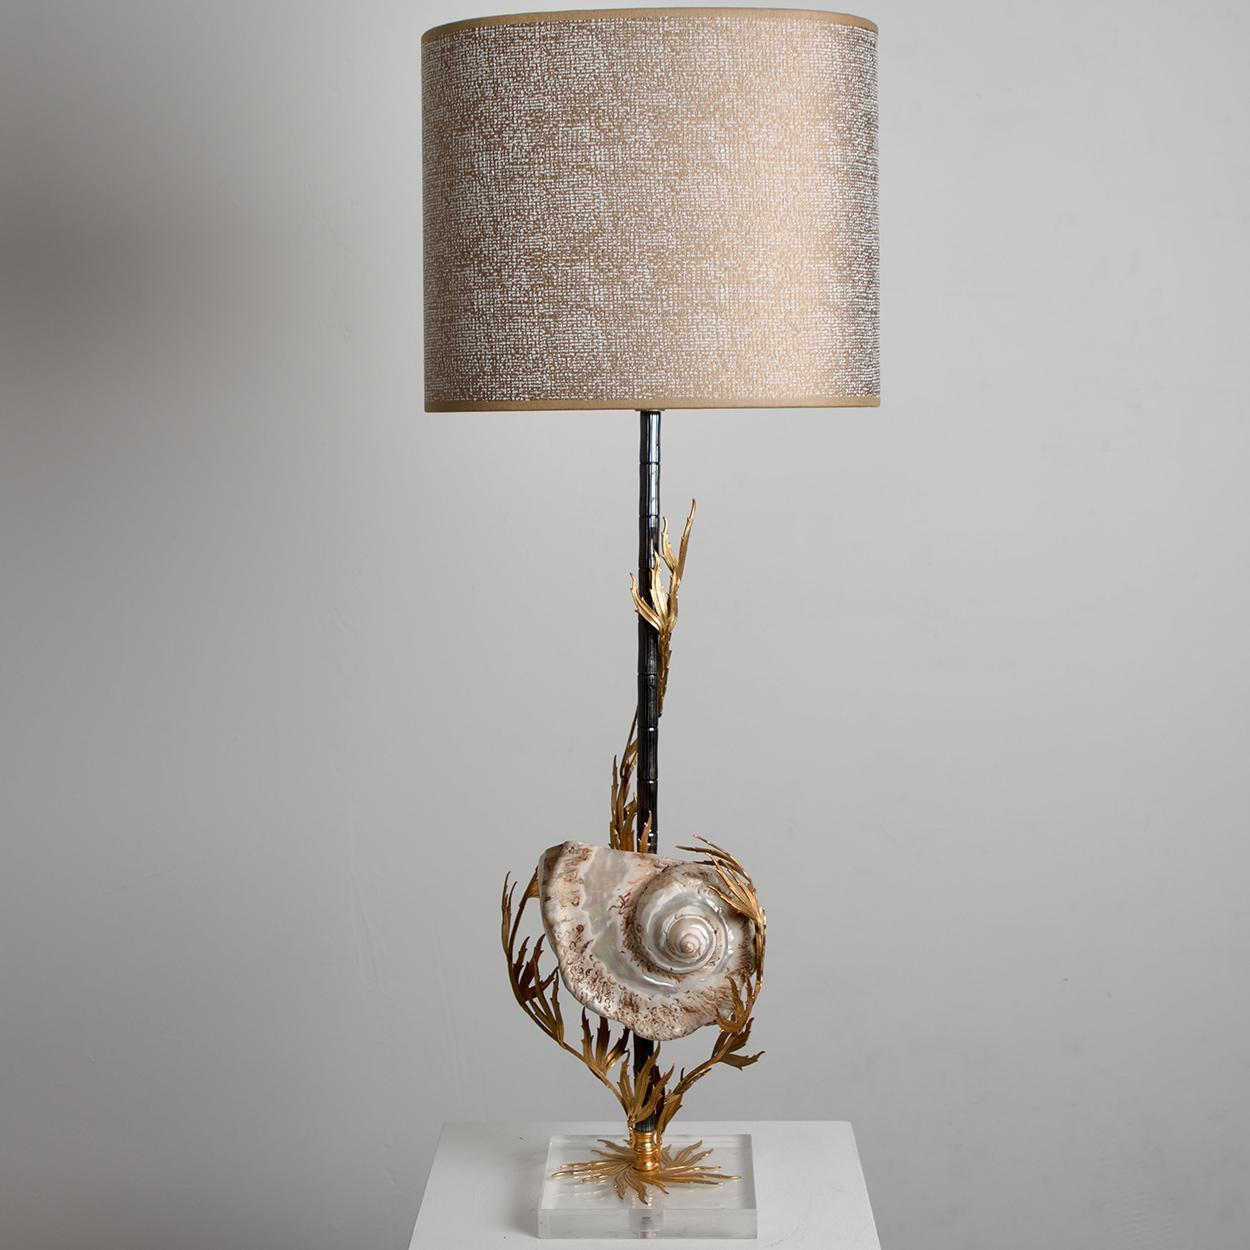 An unique table lamp with a large real shell on the base. The lamp is ornamented with beautiful brass coral details and comes with a handmade semi-shiny lampshade which gives a warm light.
The lamp is manufactured in Italy, Europe.

This